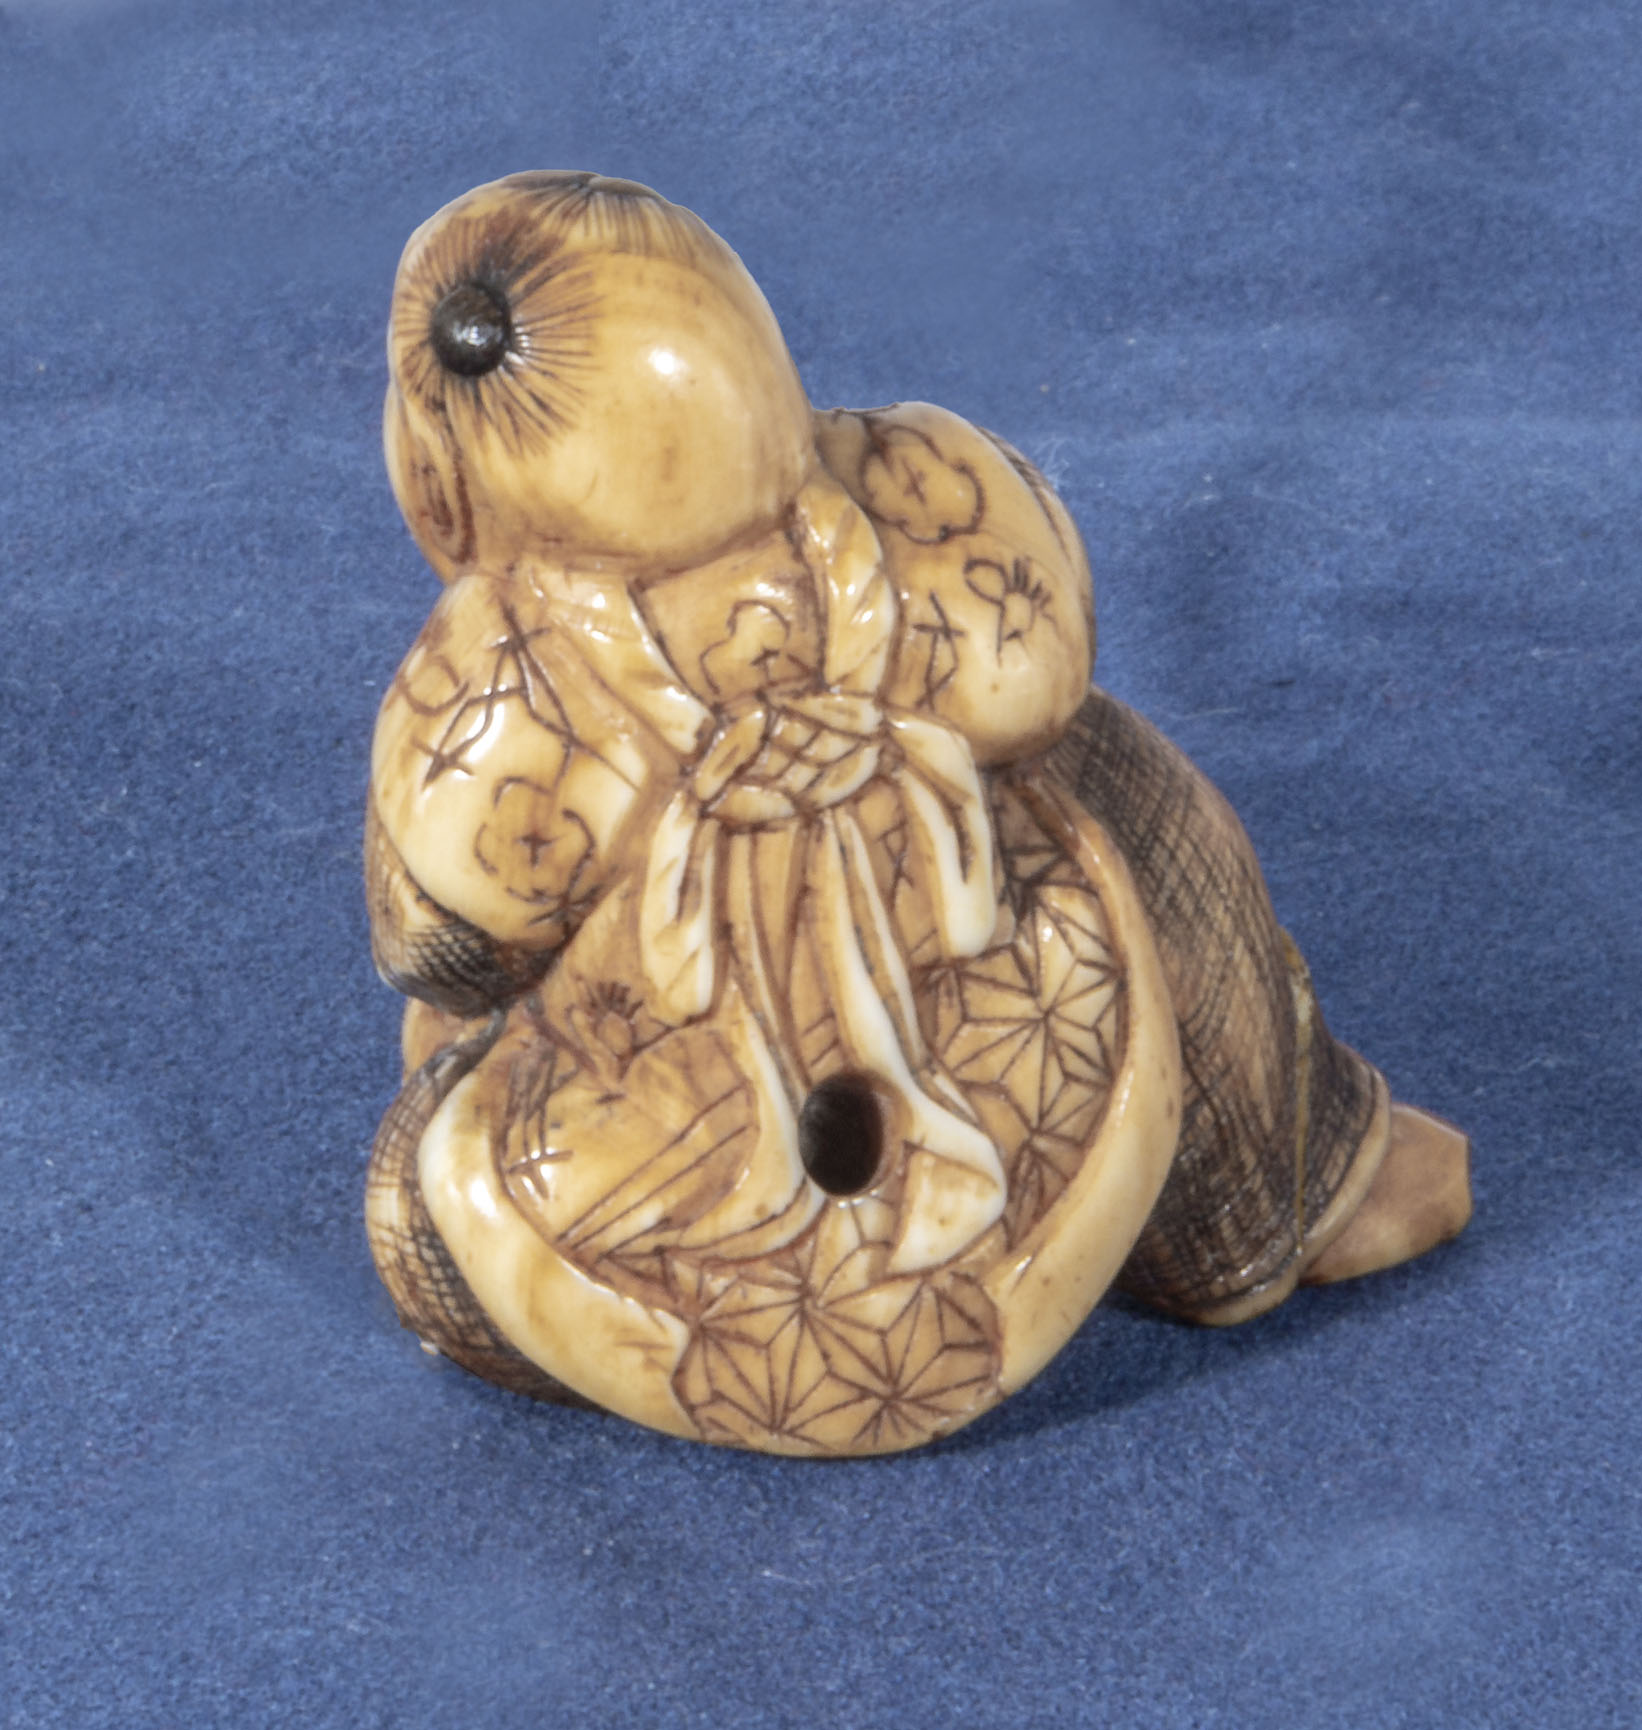 An antique netsuke depicting a man with small horn roundells onlaid on his head carrying a basket, - Image 2 of 3